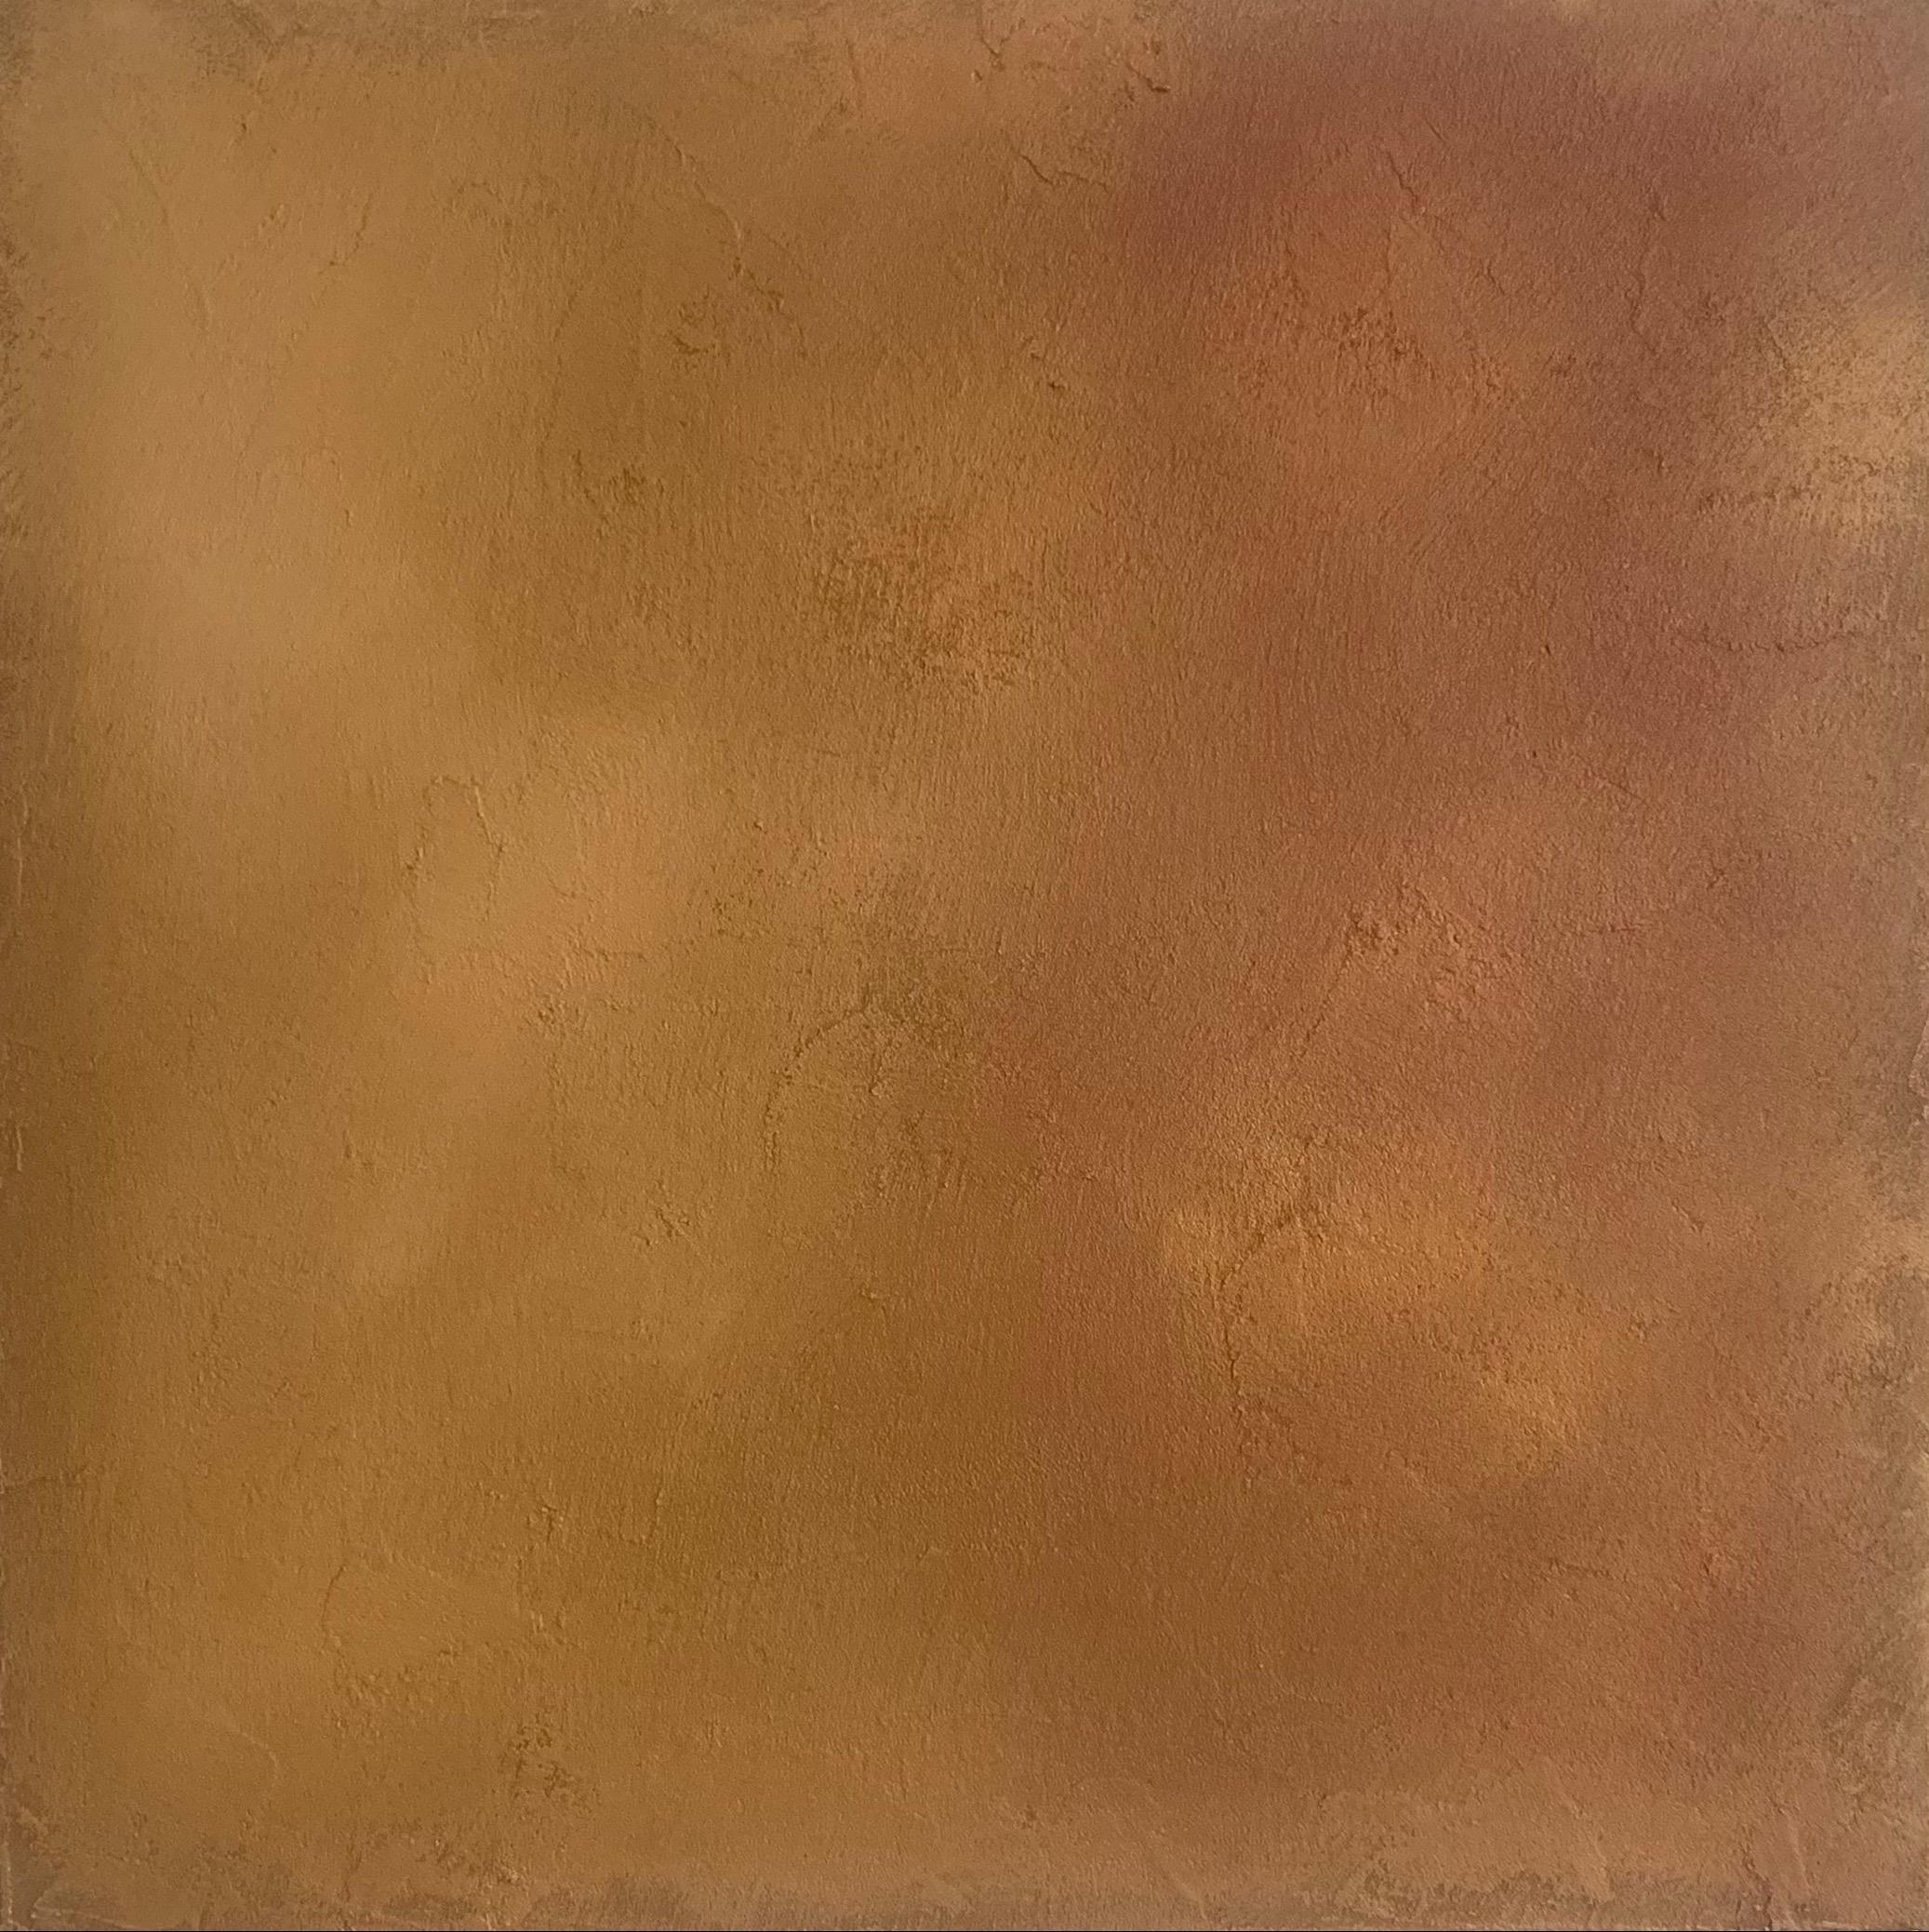 Iryna Antoniuk Abstract Painting - Golden Sand Effect Abstract Textured Painting